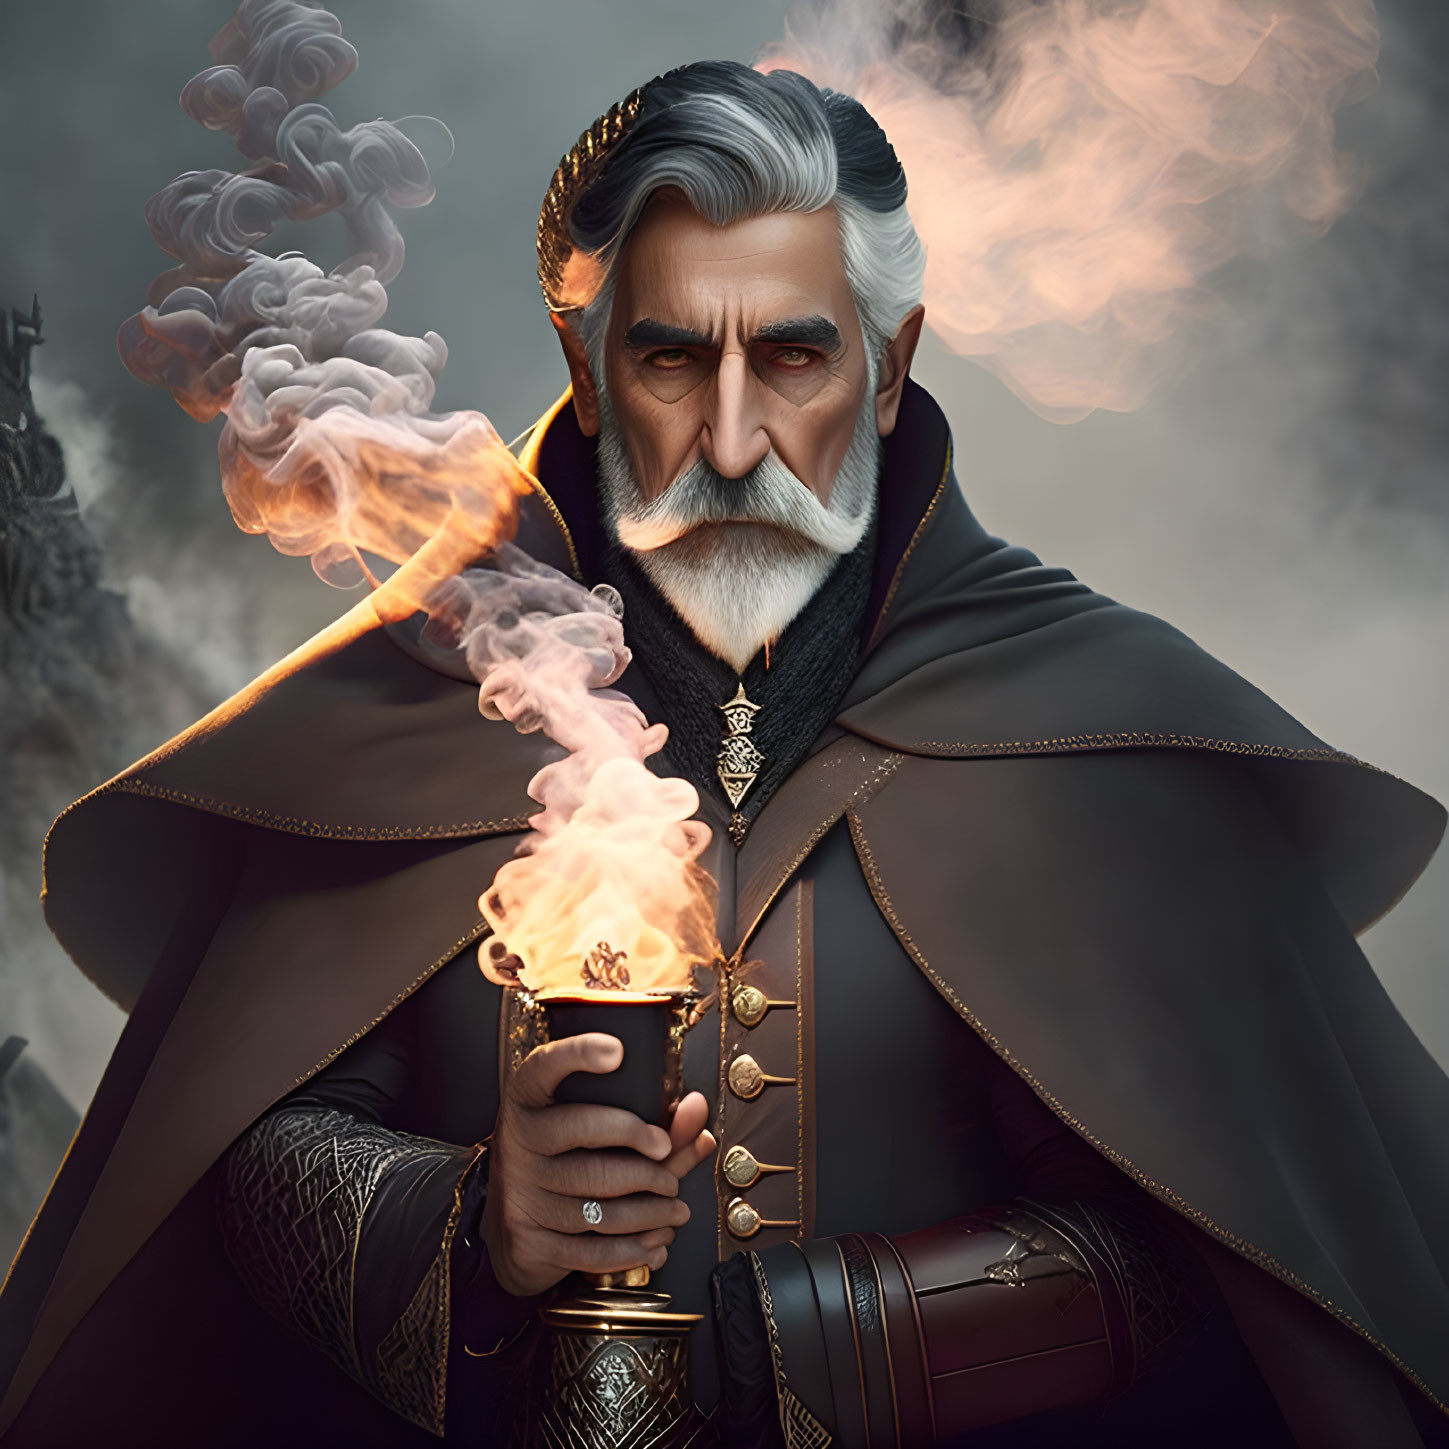 Elderly man with white beard holding mystical flame chalice in fantasy illustration